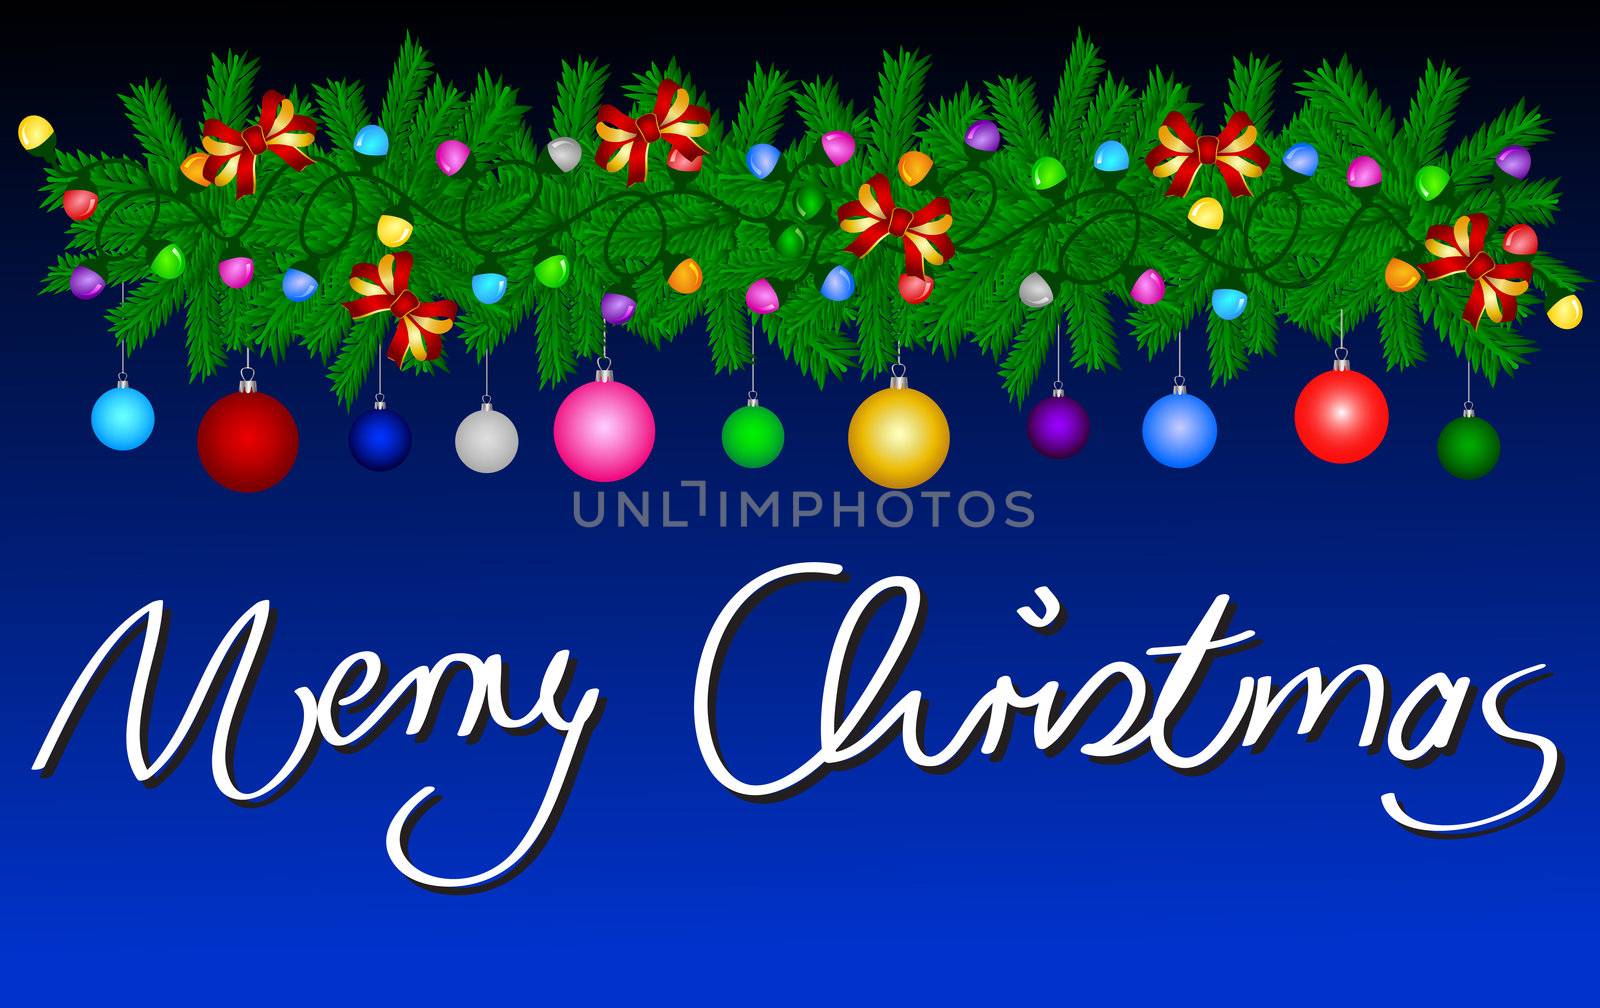 Merry Christmas Card by peromarketing